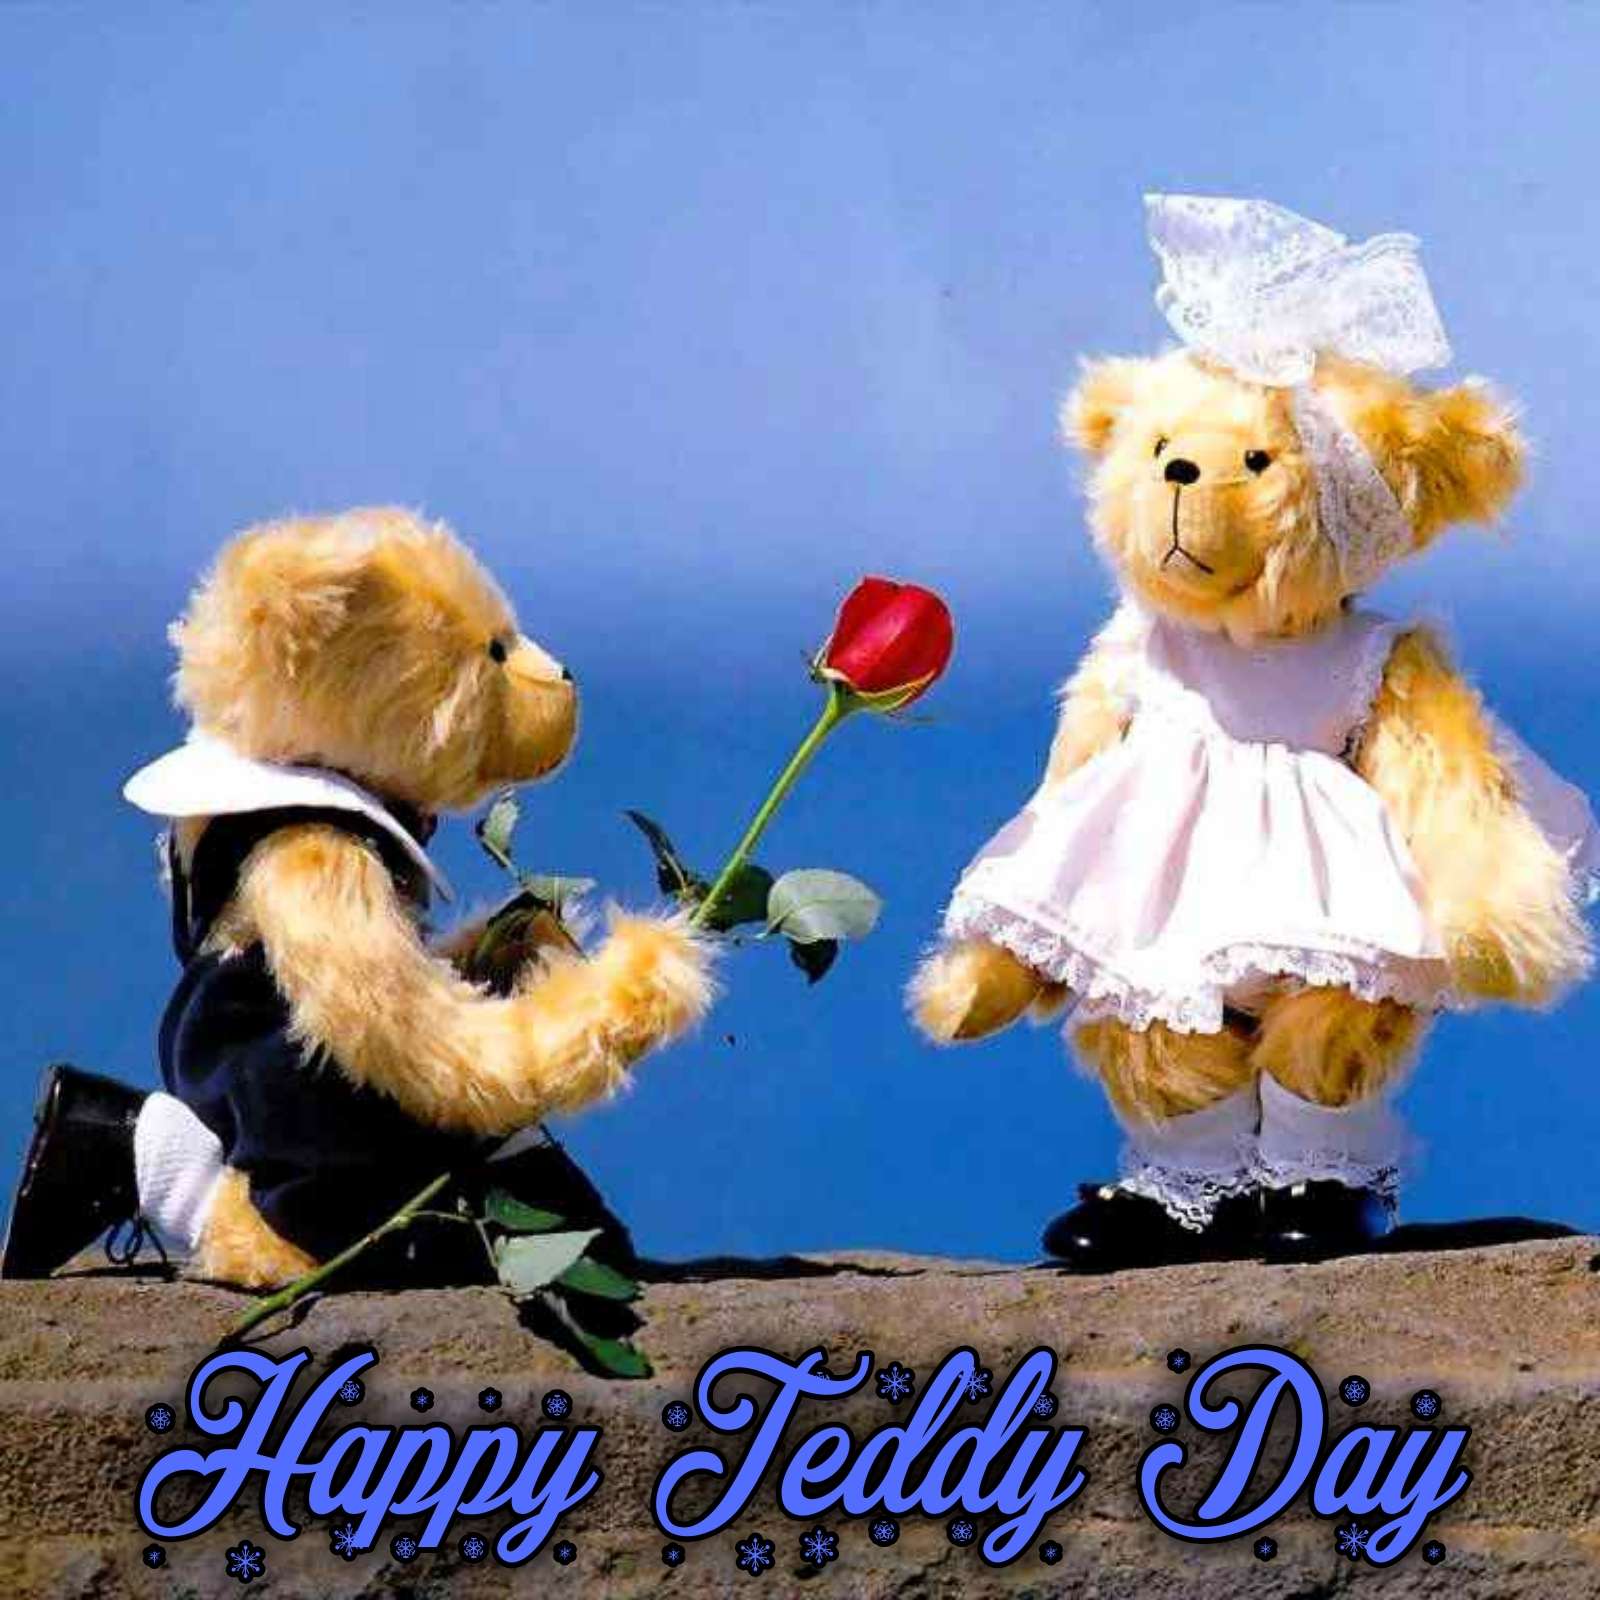 Romantic Love Romantic Teddy Day Images Download